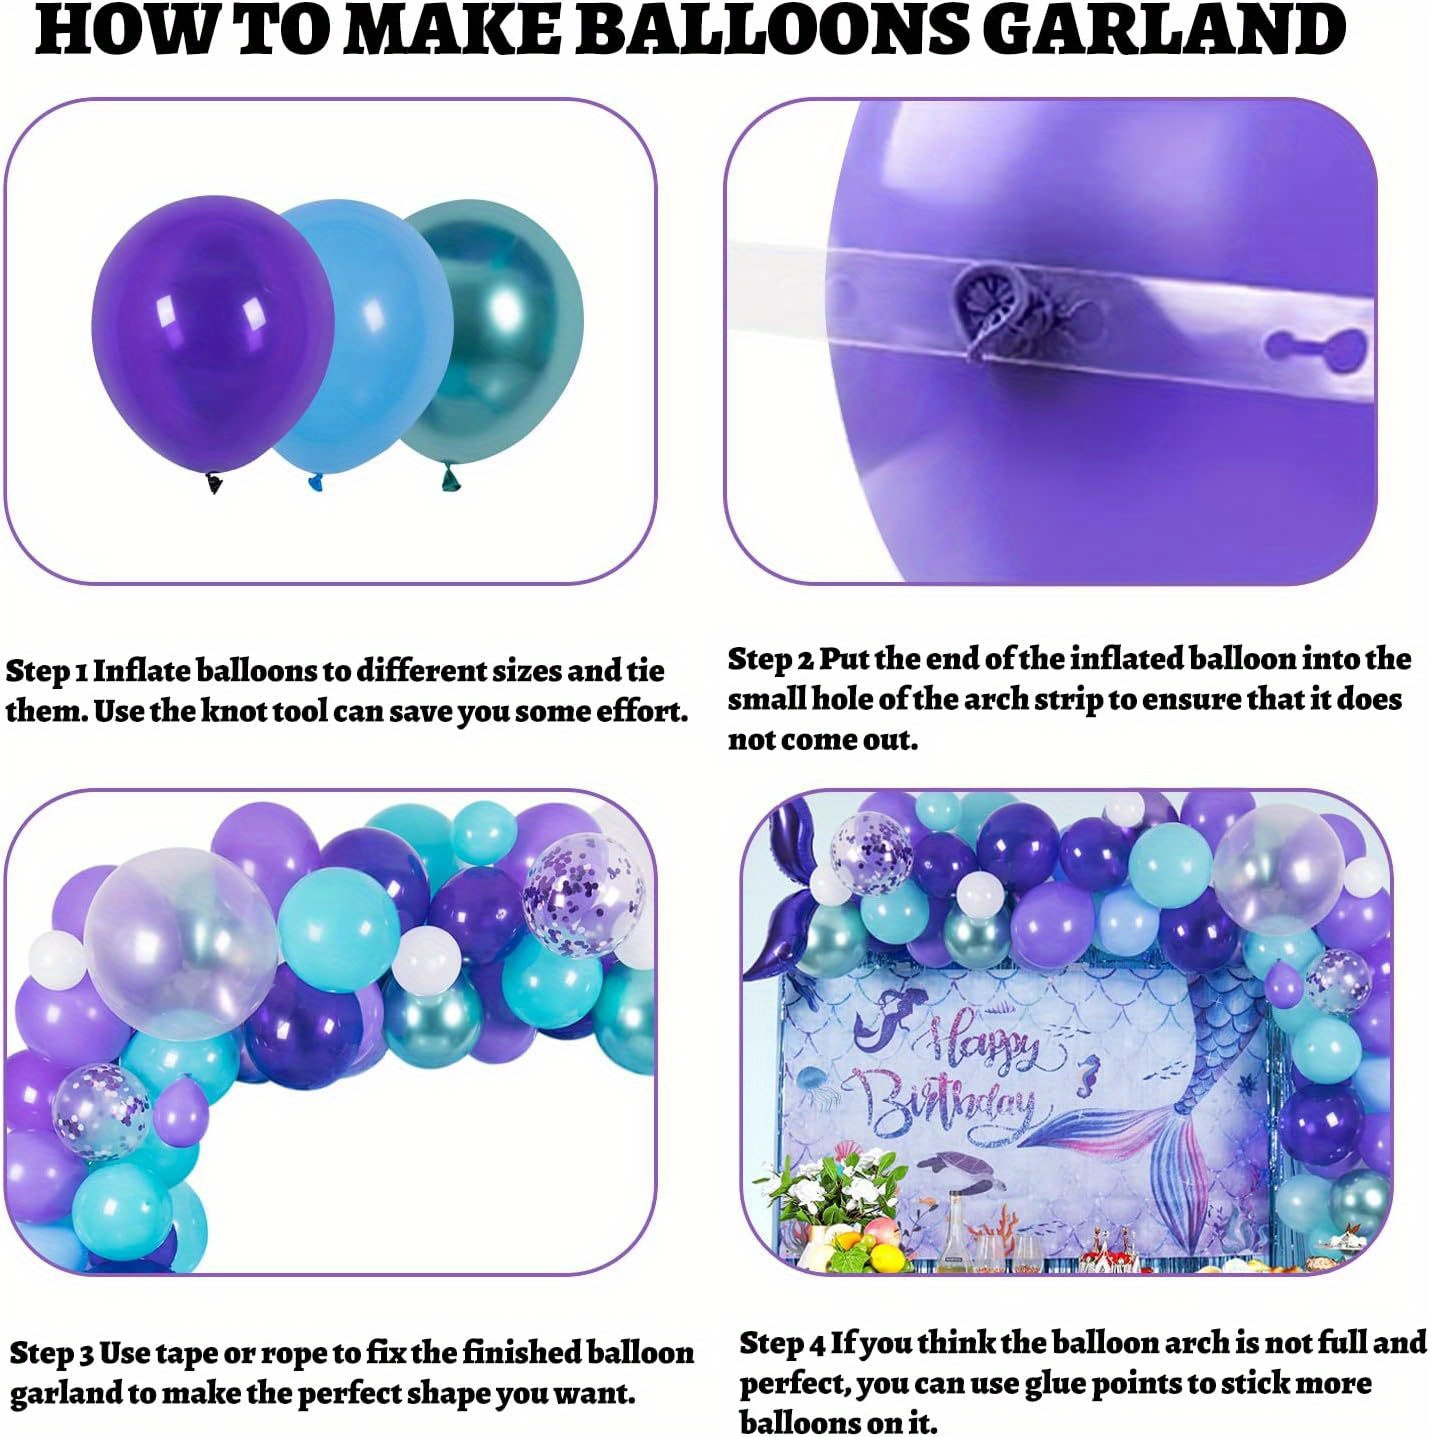 Mermaid Party Balloons Garland Kit Birthday Decorations Include